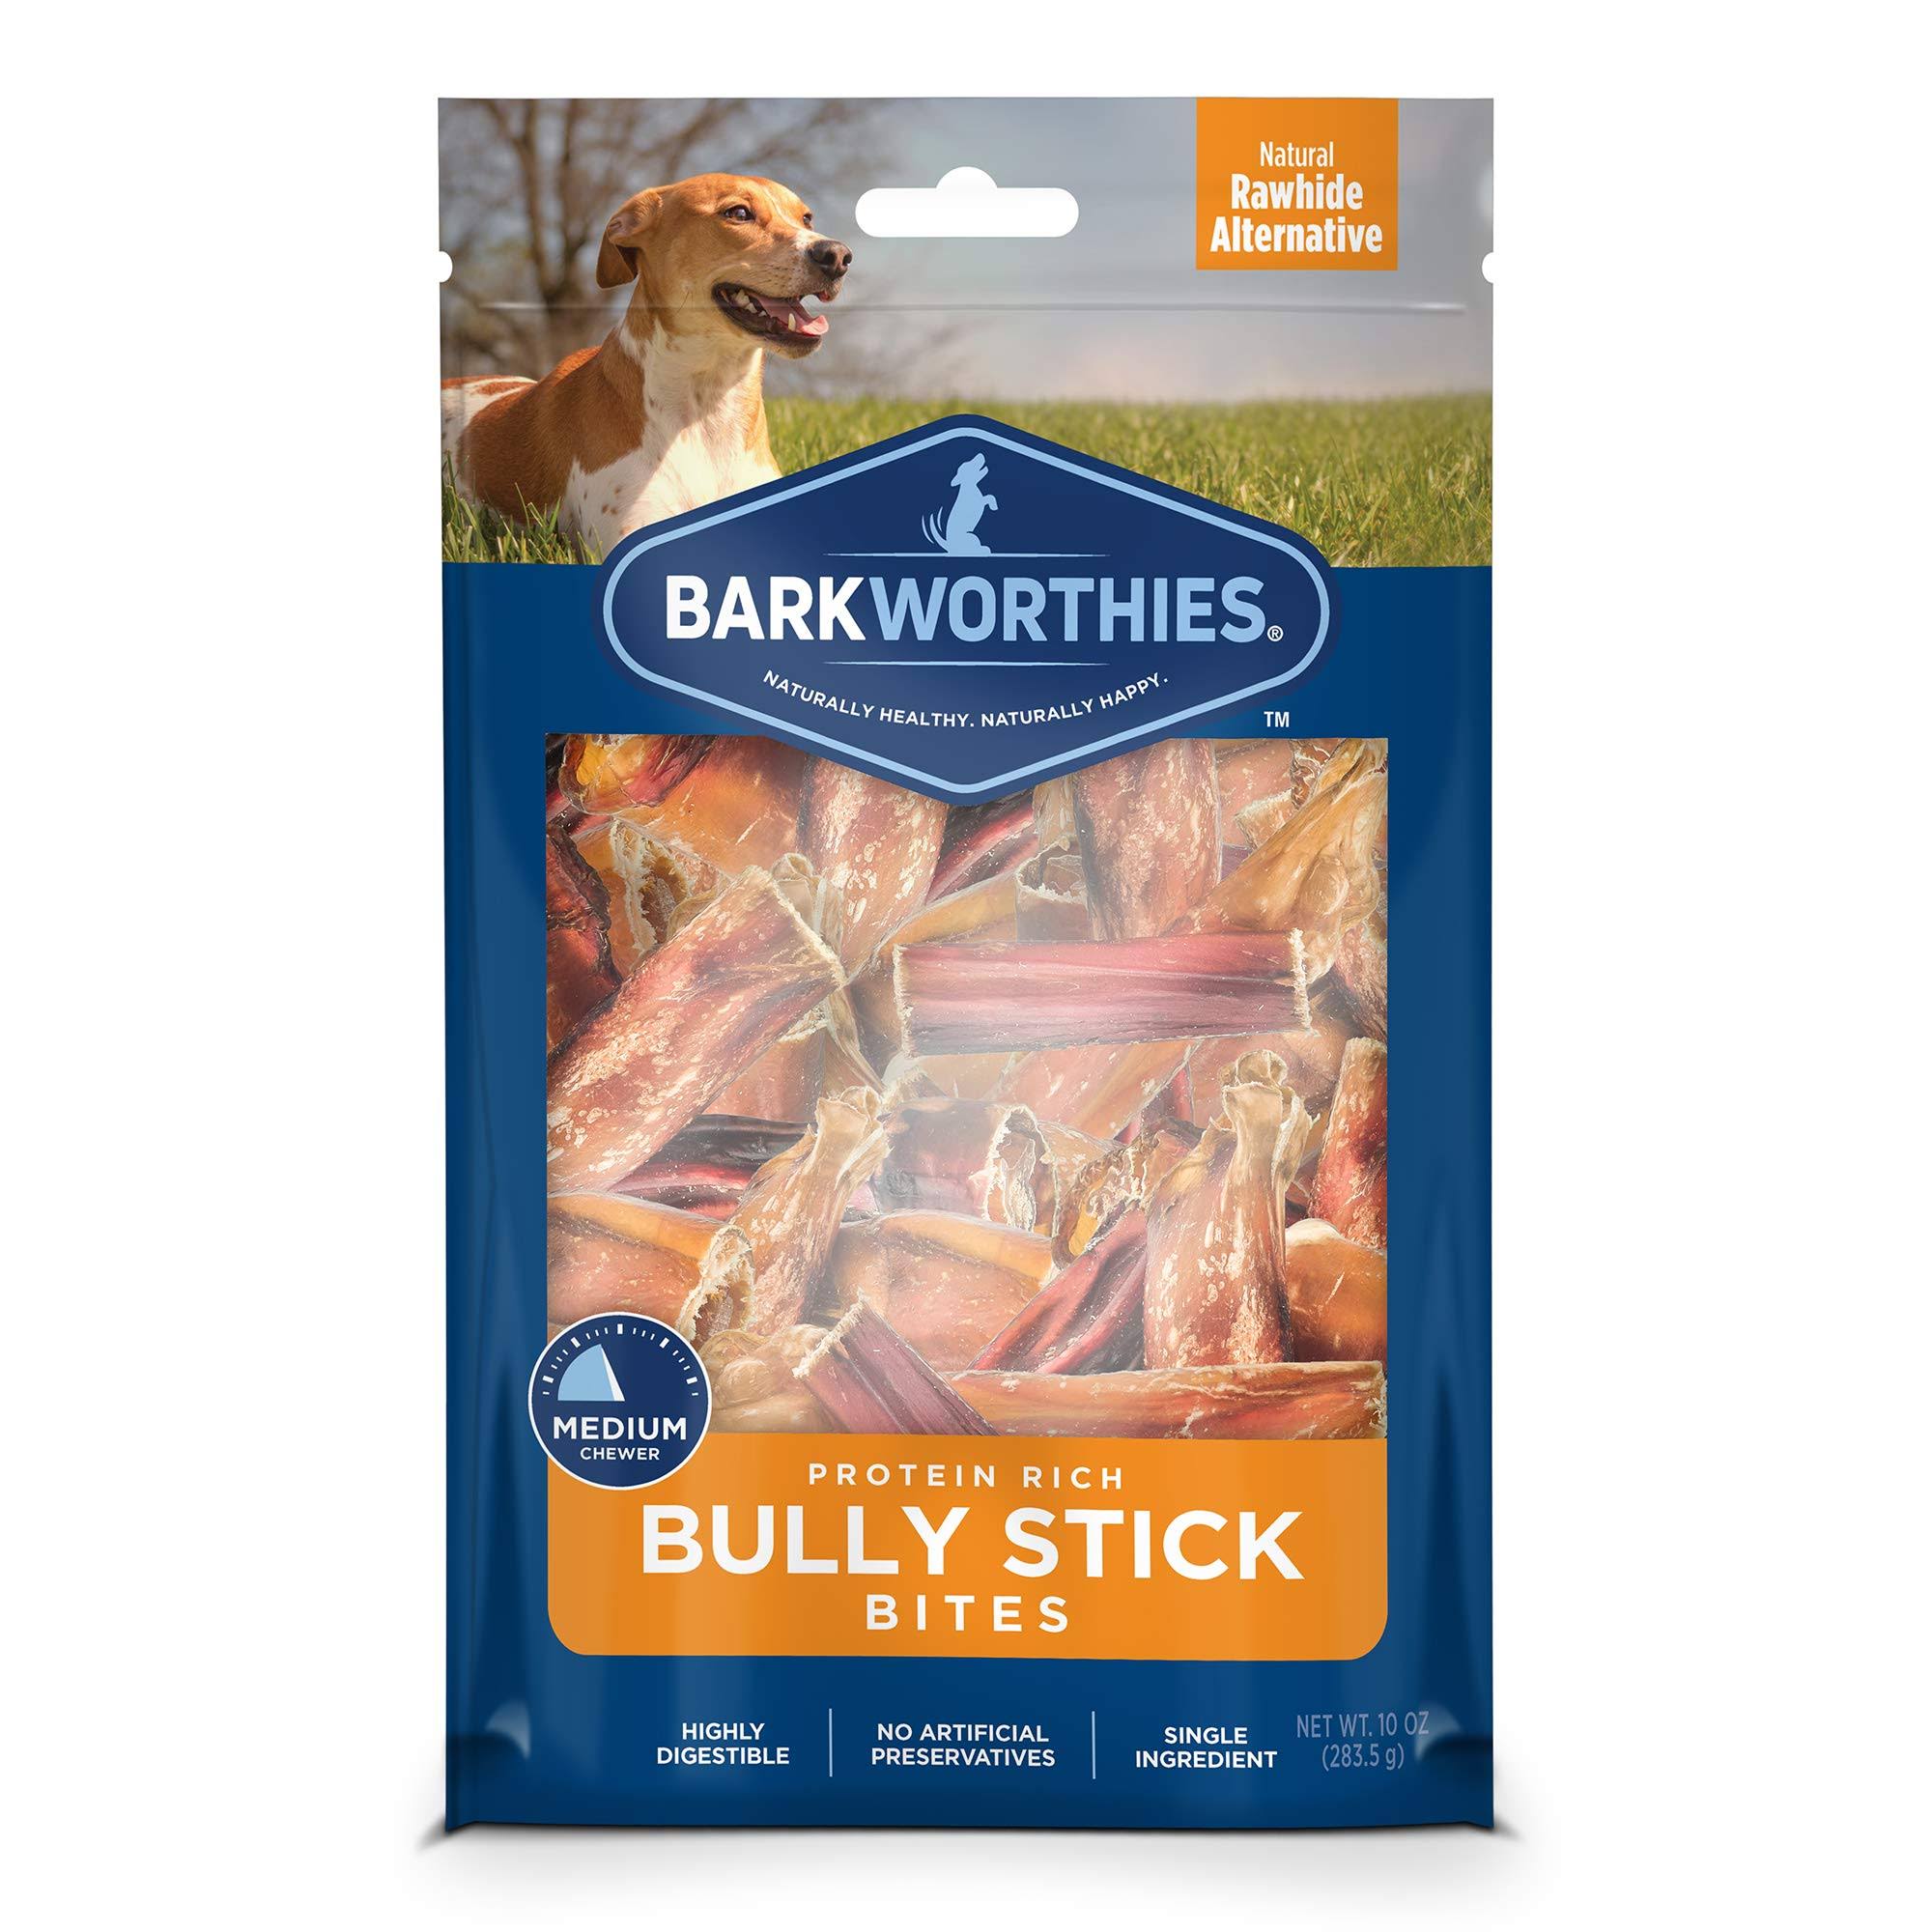 Barkworthies Protein-Rich Bully Stick Bites (10oz. Bag) - All-Natural